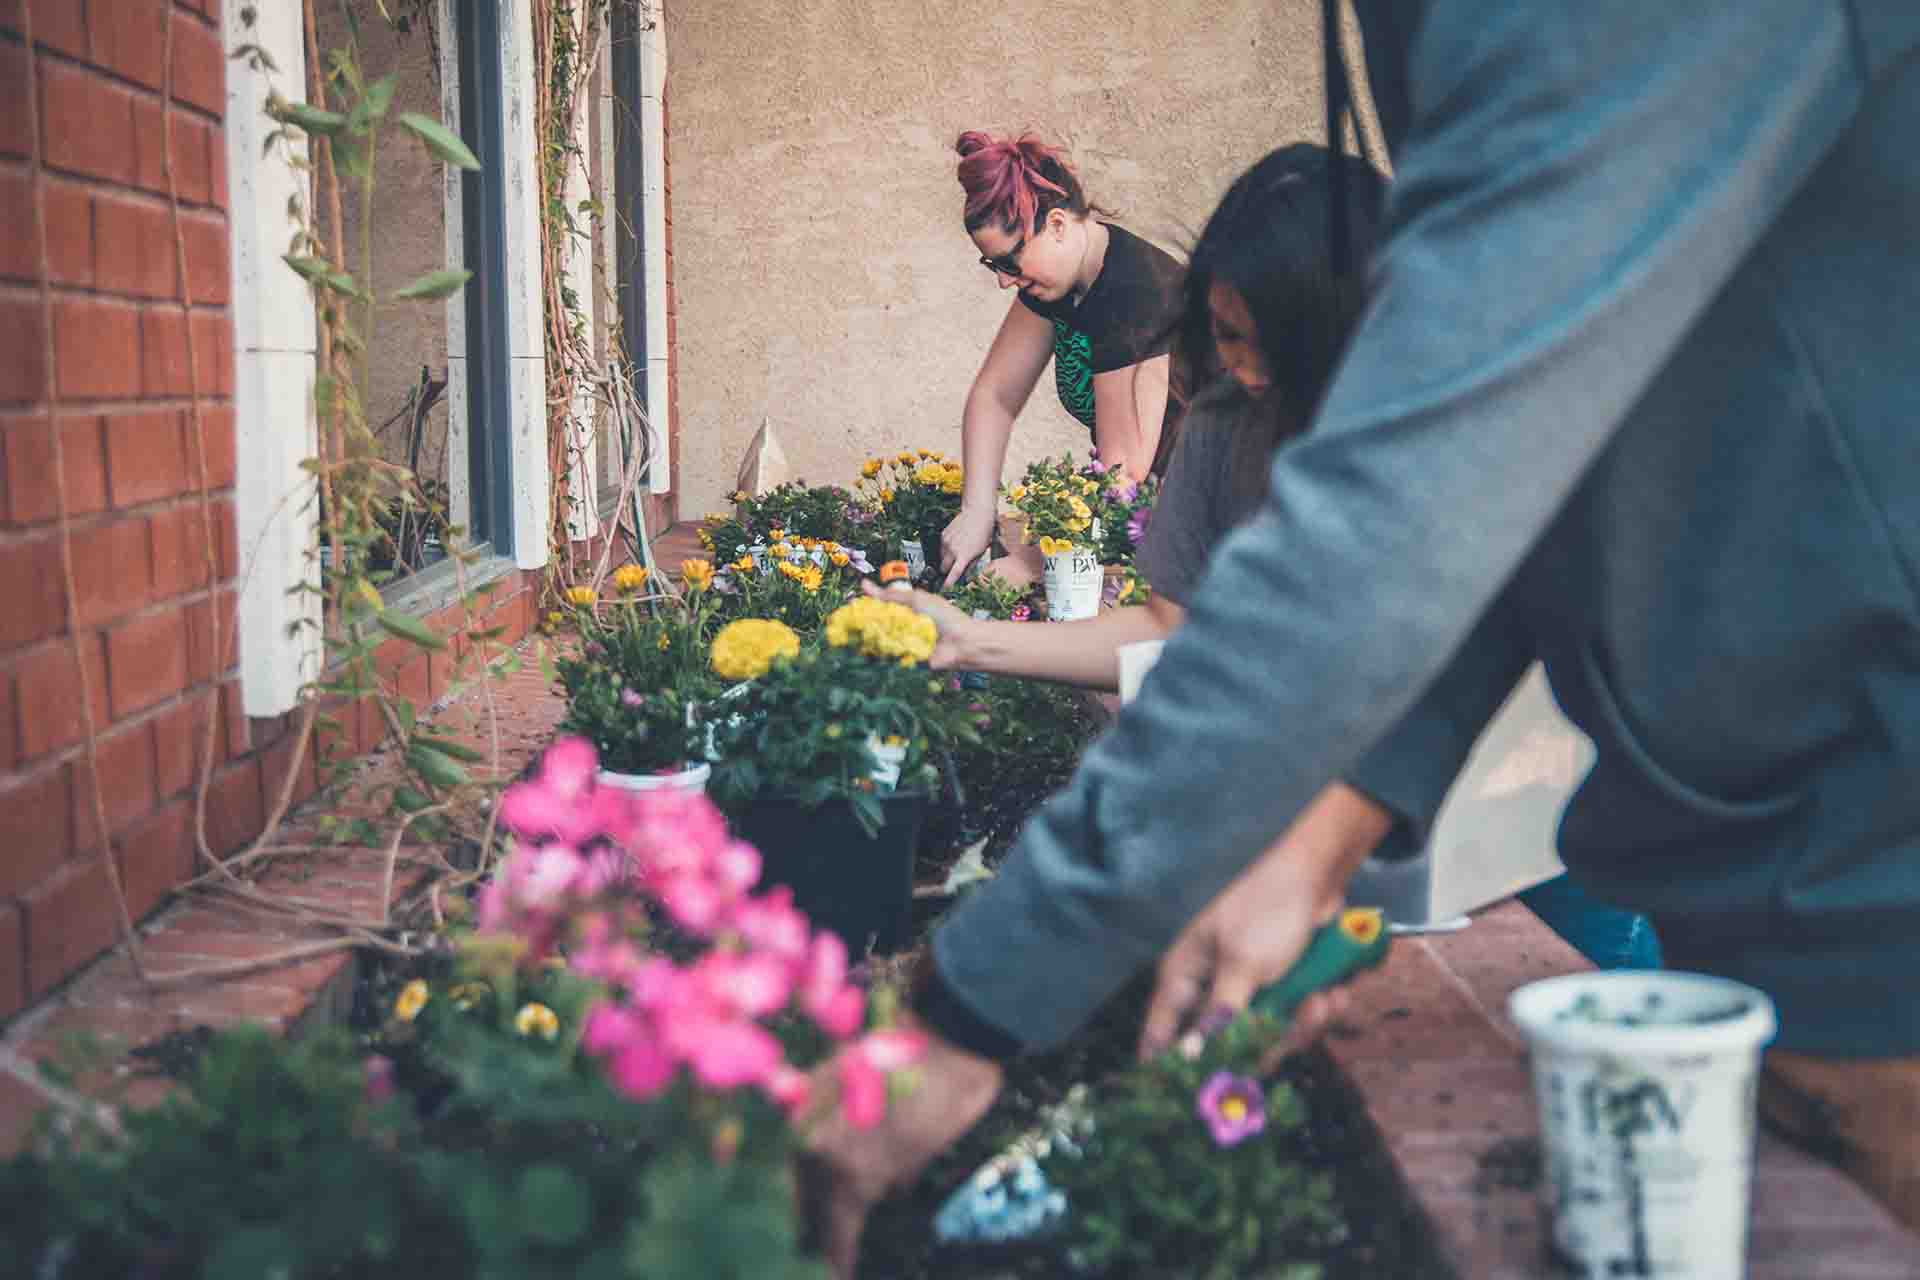 Members of the community sorting out plants and flowers together